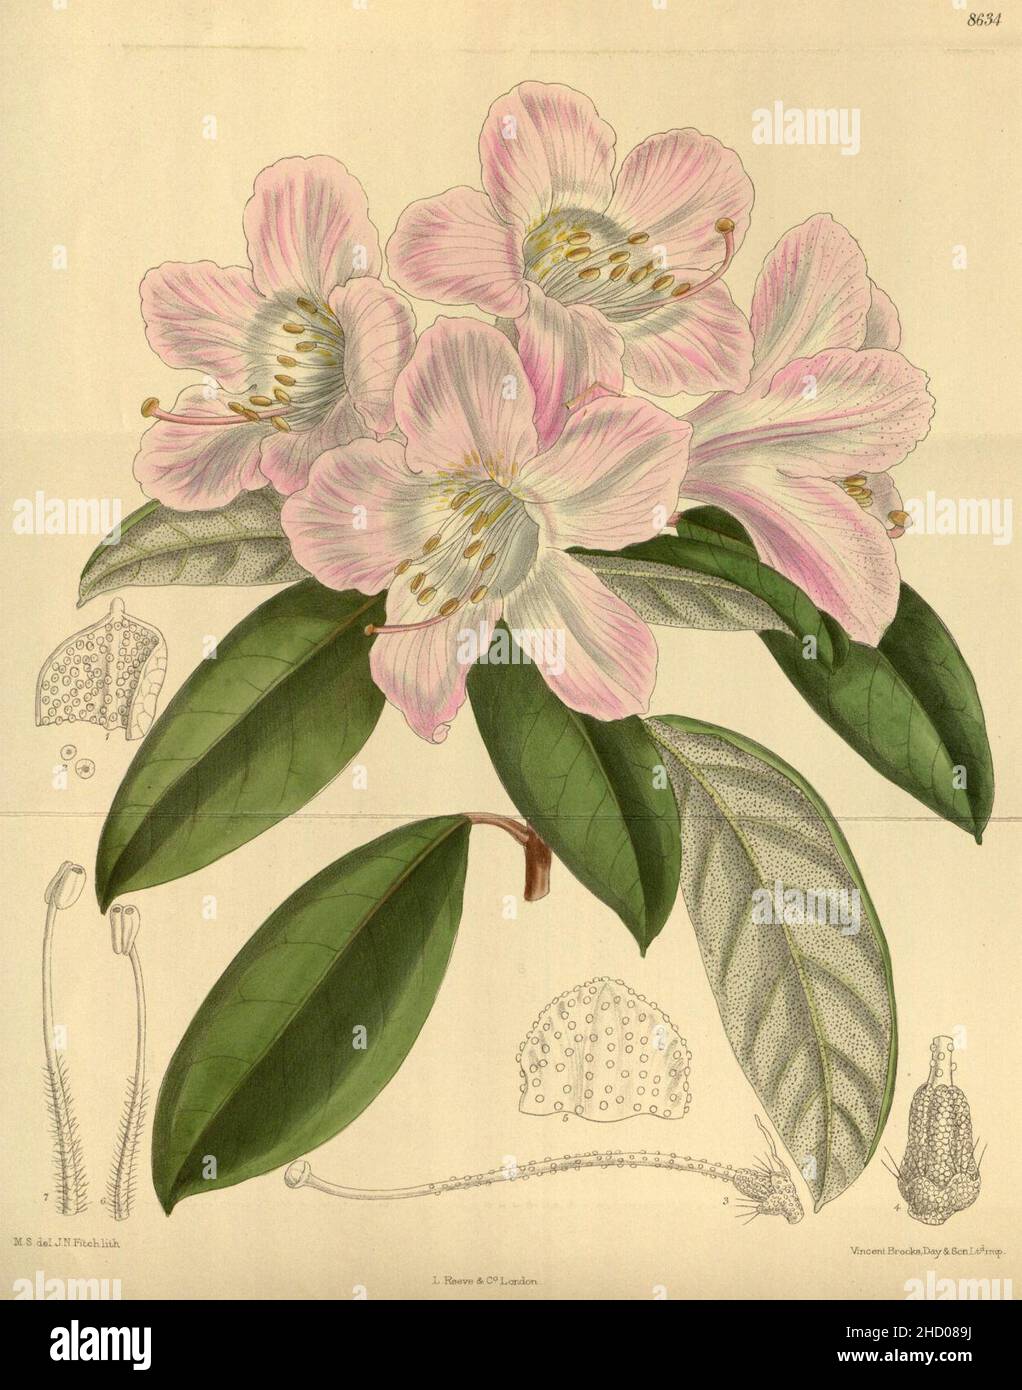 Rhododendron carneum 141-8634. Stock Photo